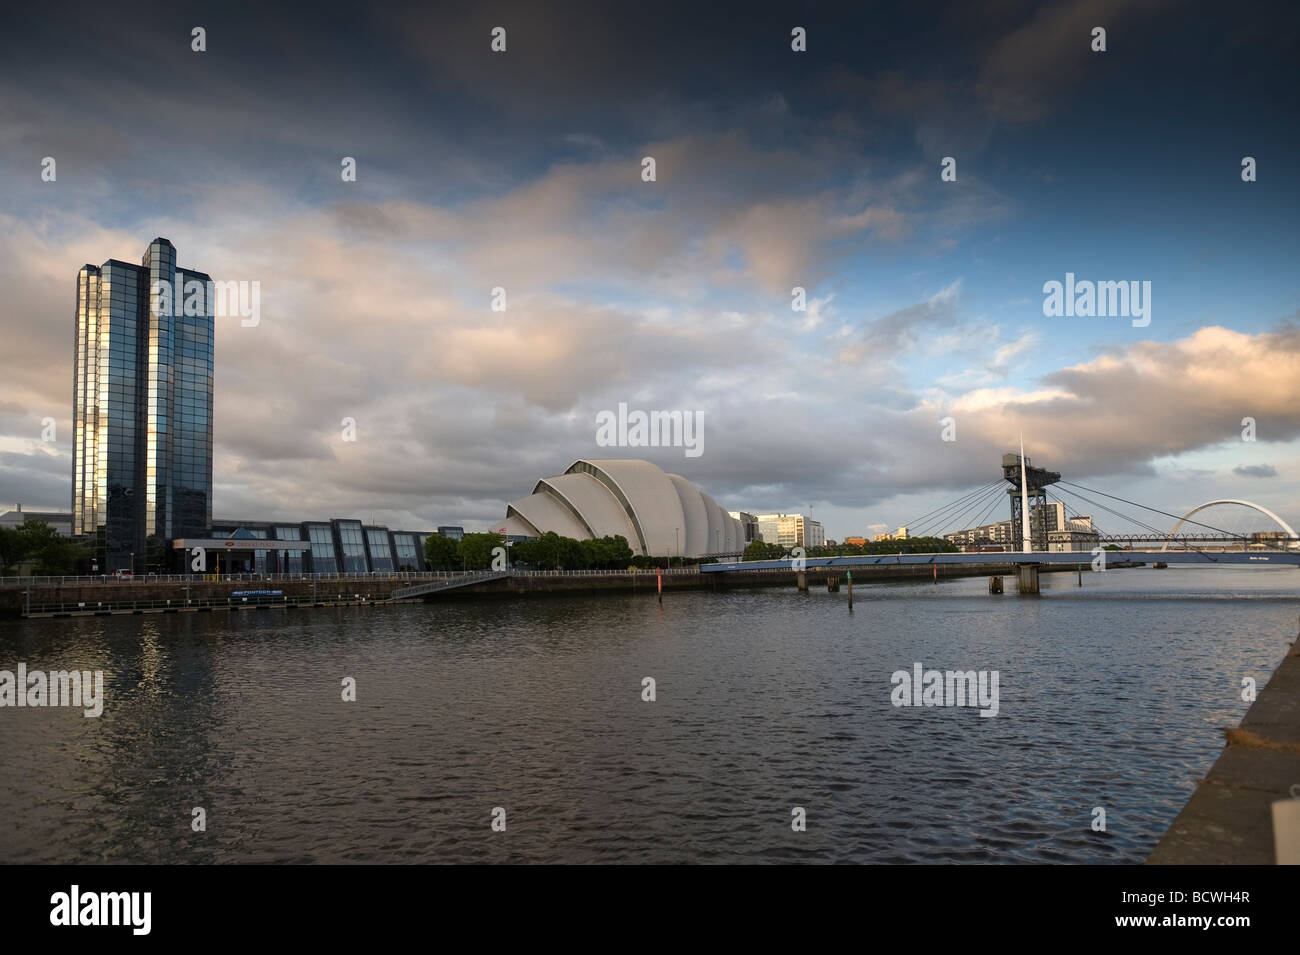 Hotel Crown Plaza, Clyde Auditorium and Bell Bridge at Clyde river, Glasgow, Scotland, United Kingdom, Europe Stock Photo